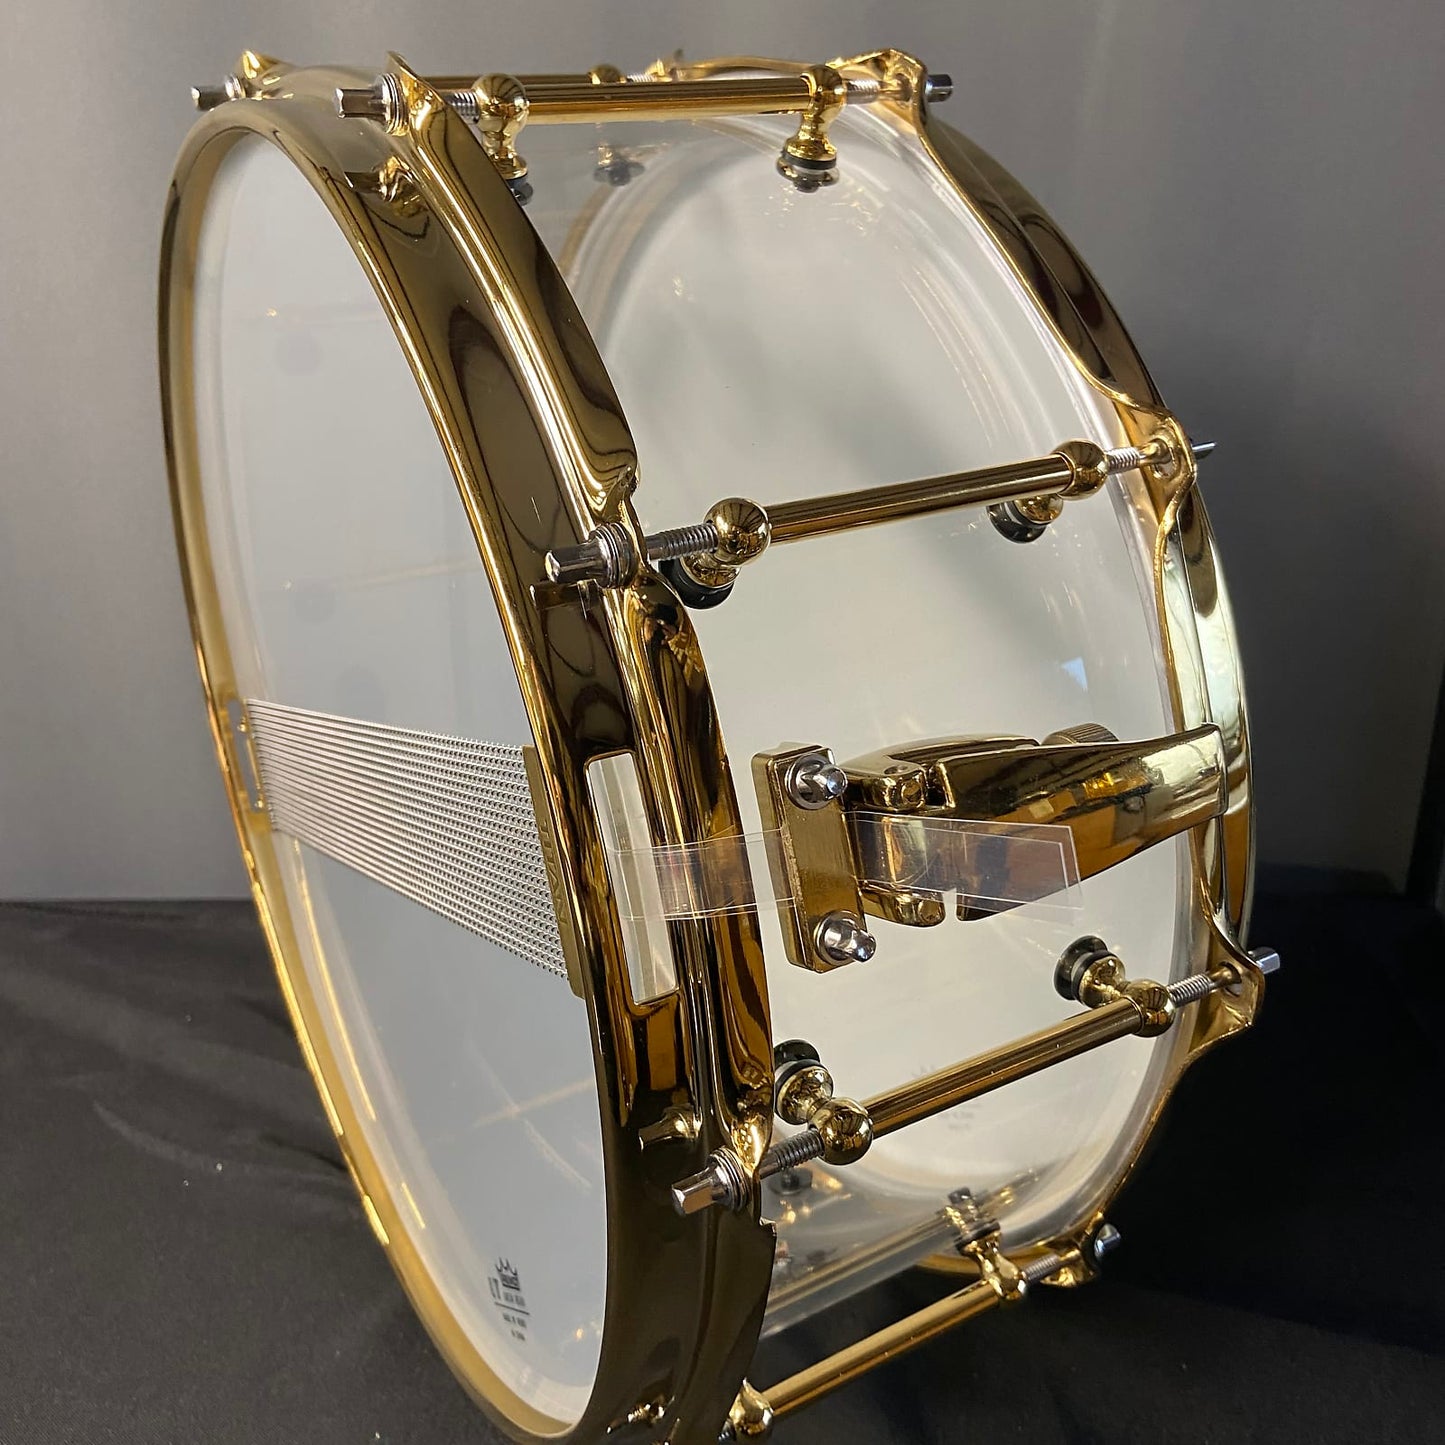 Clear Acrylic Snare Drum With Brass